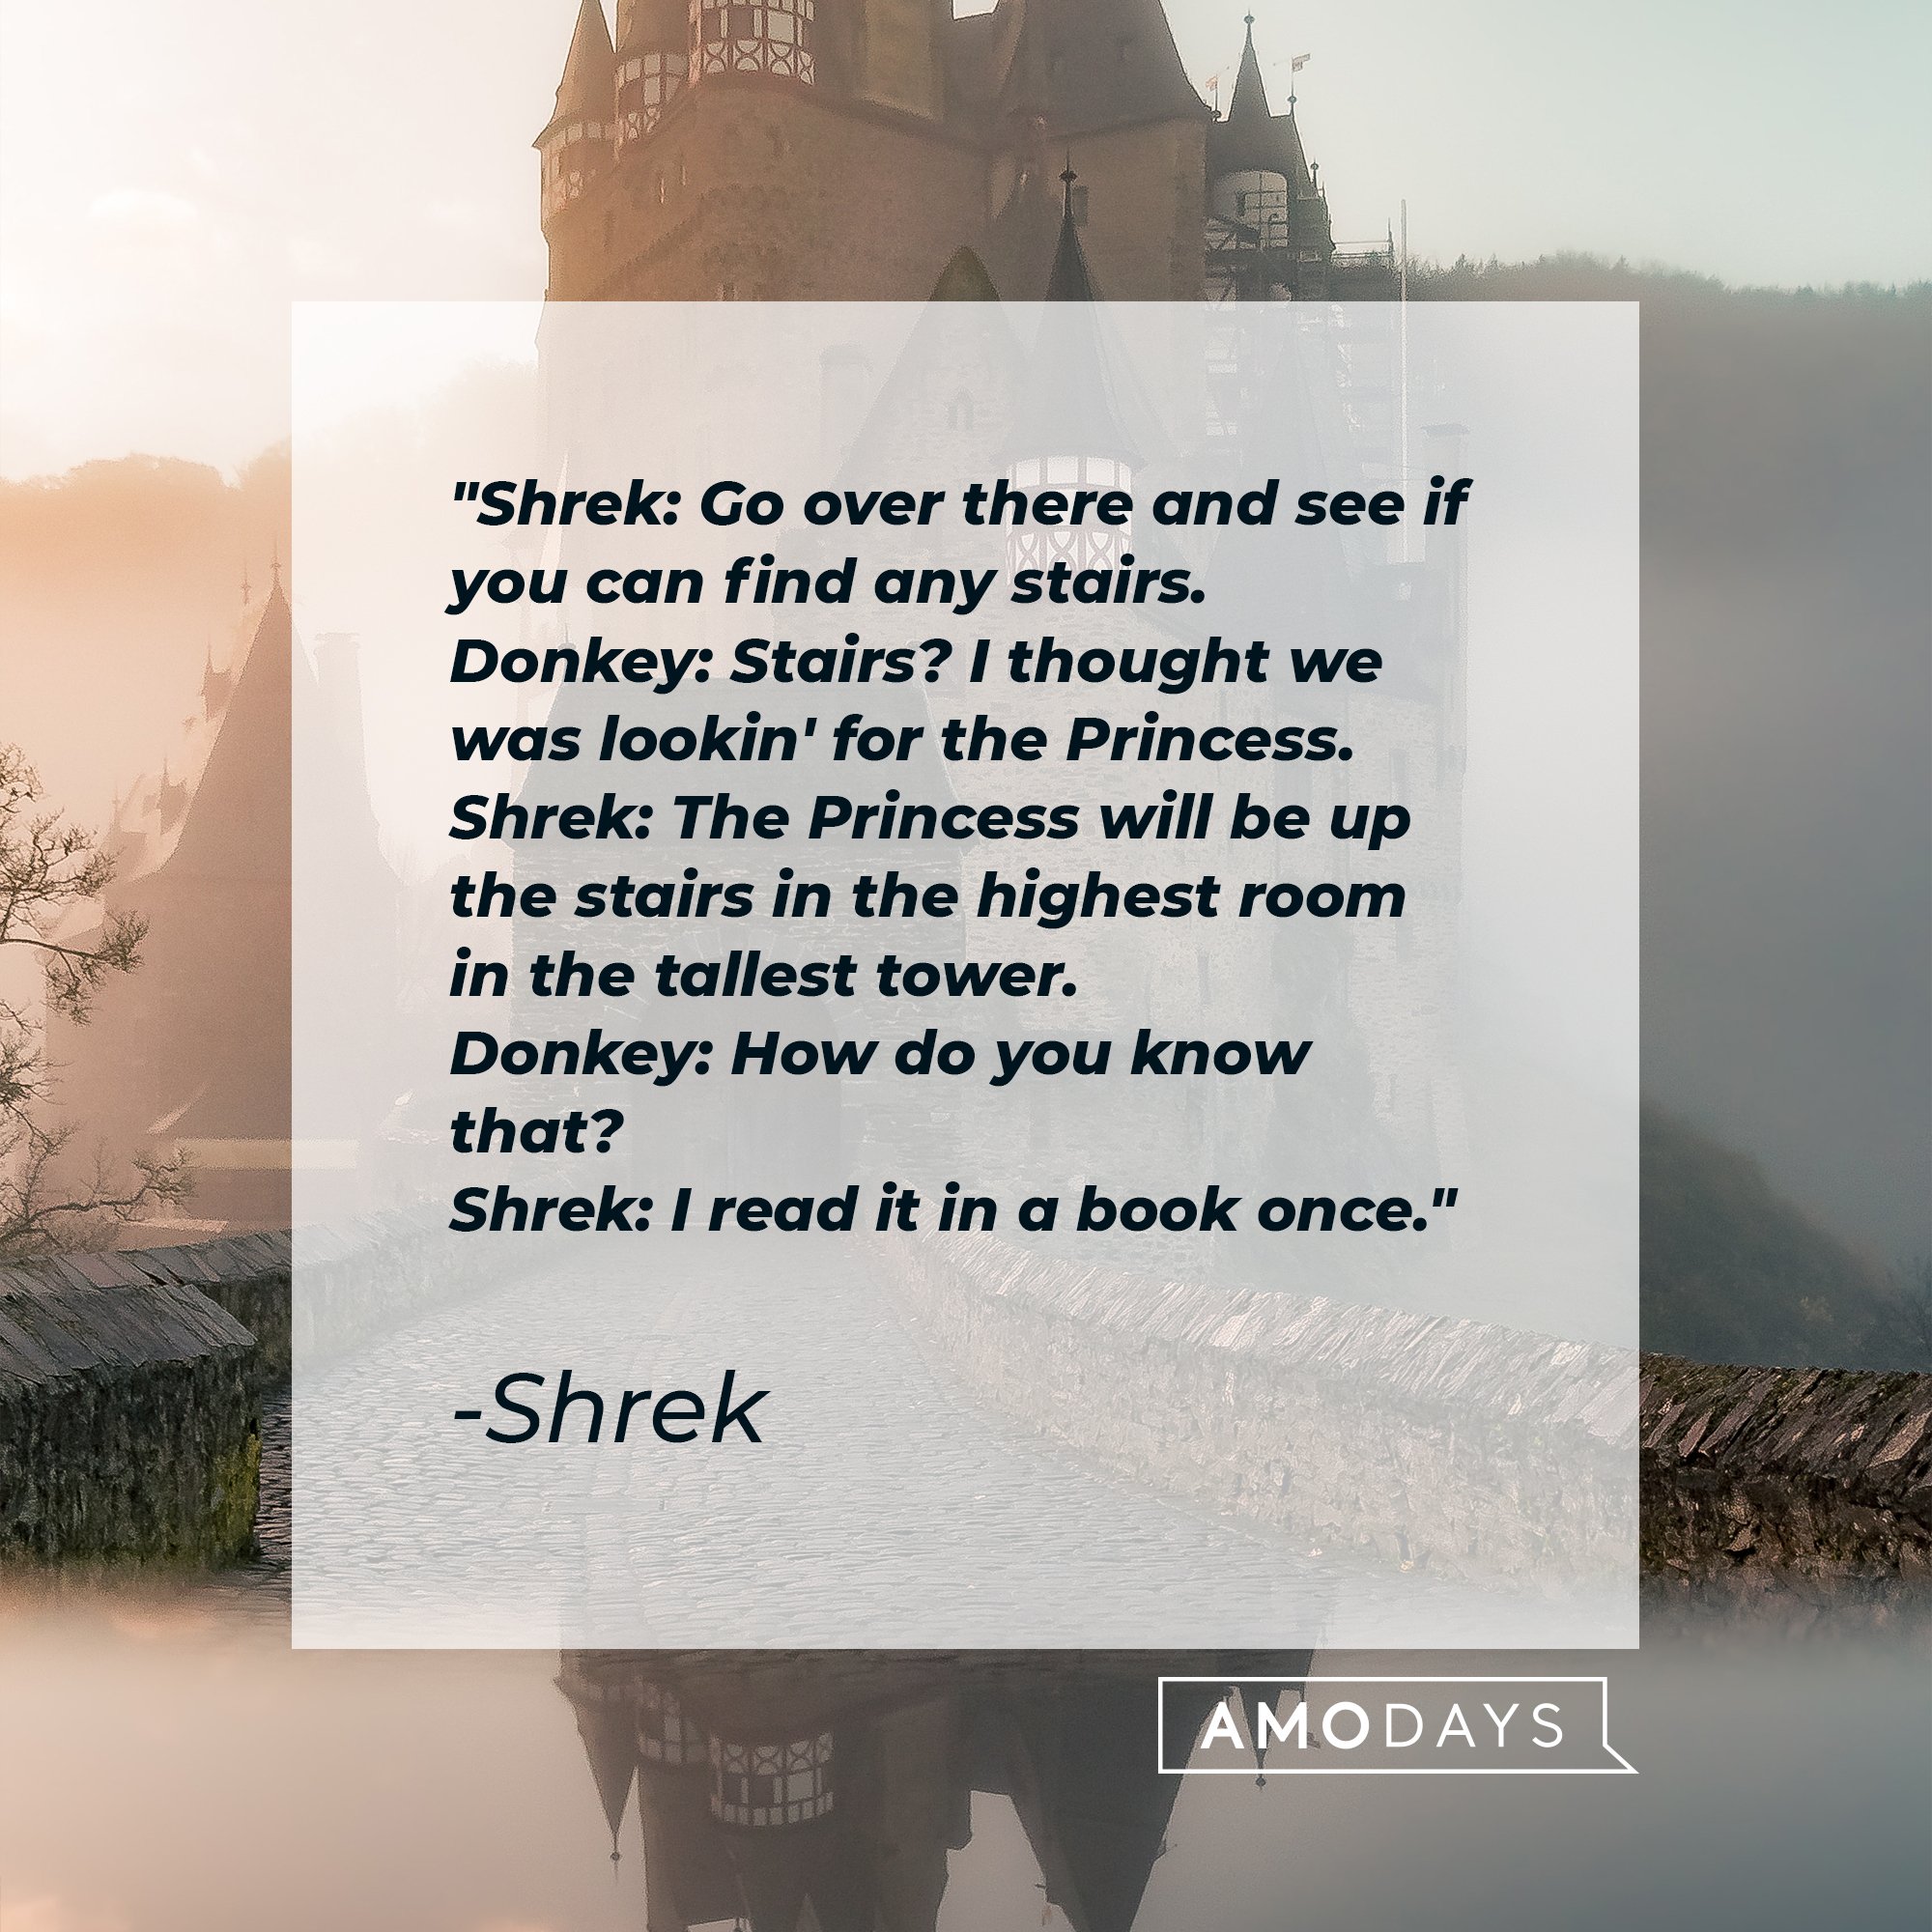 "Shrek" dialogue: "Shrek: Go over there and see if you can find any stairs.  Donkey: Stairs? I thought we was lookin' for the Princess.  Shrek: The Princess will be up the stairs in the highest room in the tallest tower.  Donkey: How do you know that?  Shrek: I read it in a book once." | Image: AmoDays